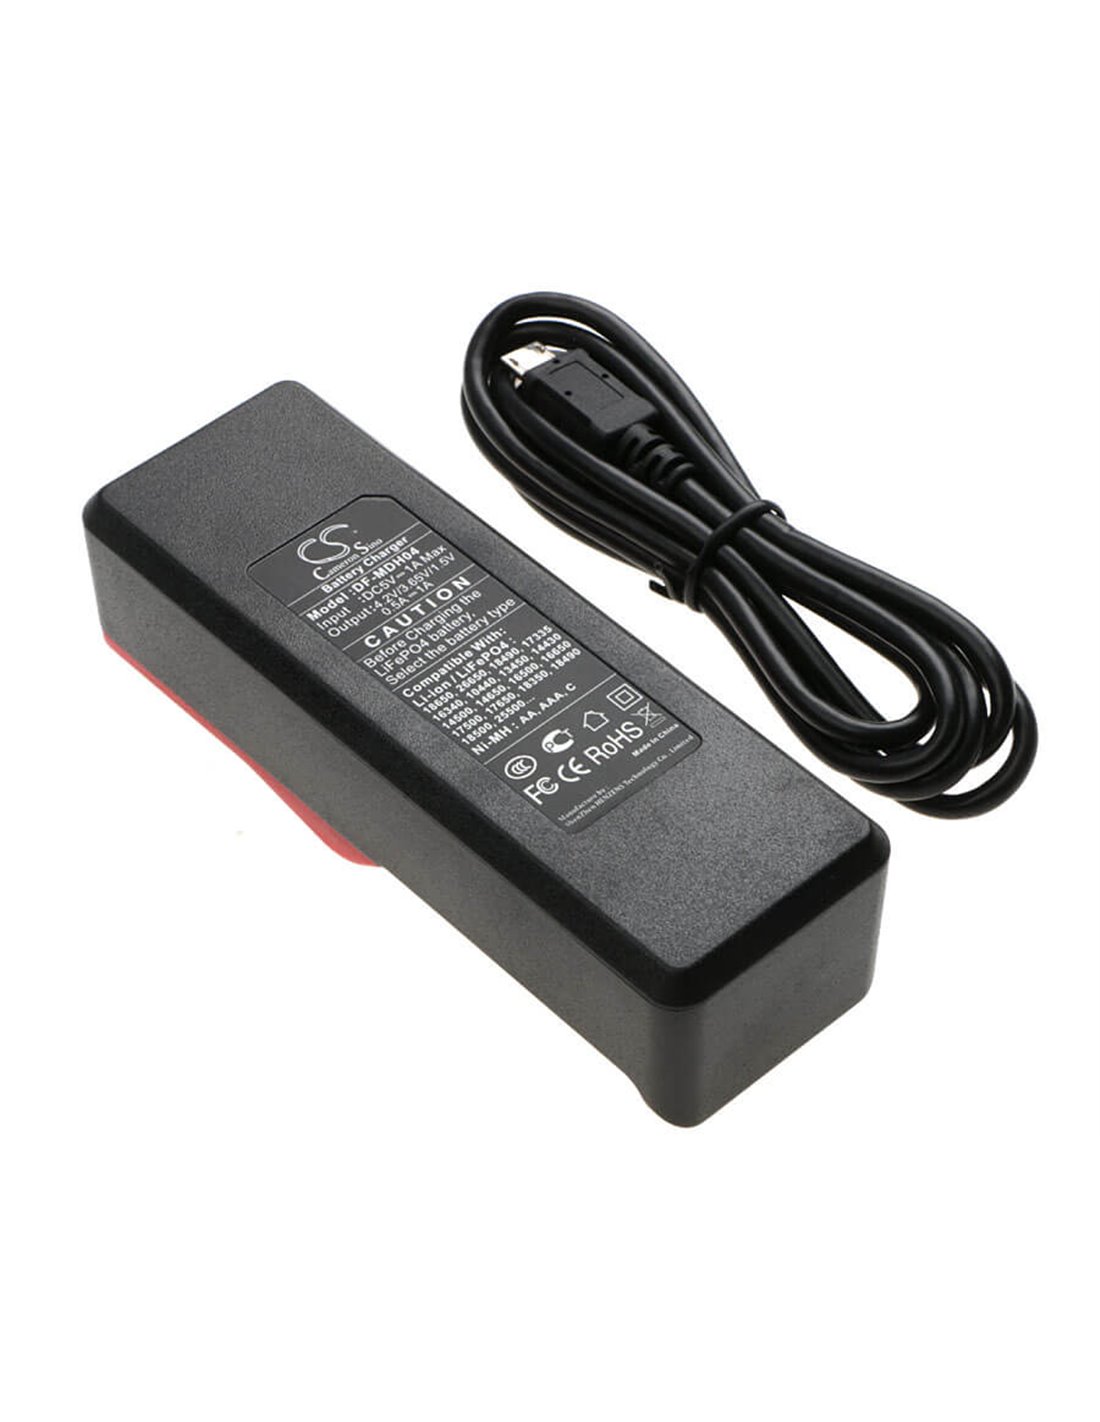 USB Single Slot Charger for AA, AAA 18650 Charges NiMh & Lithium Ion Cells